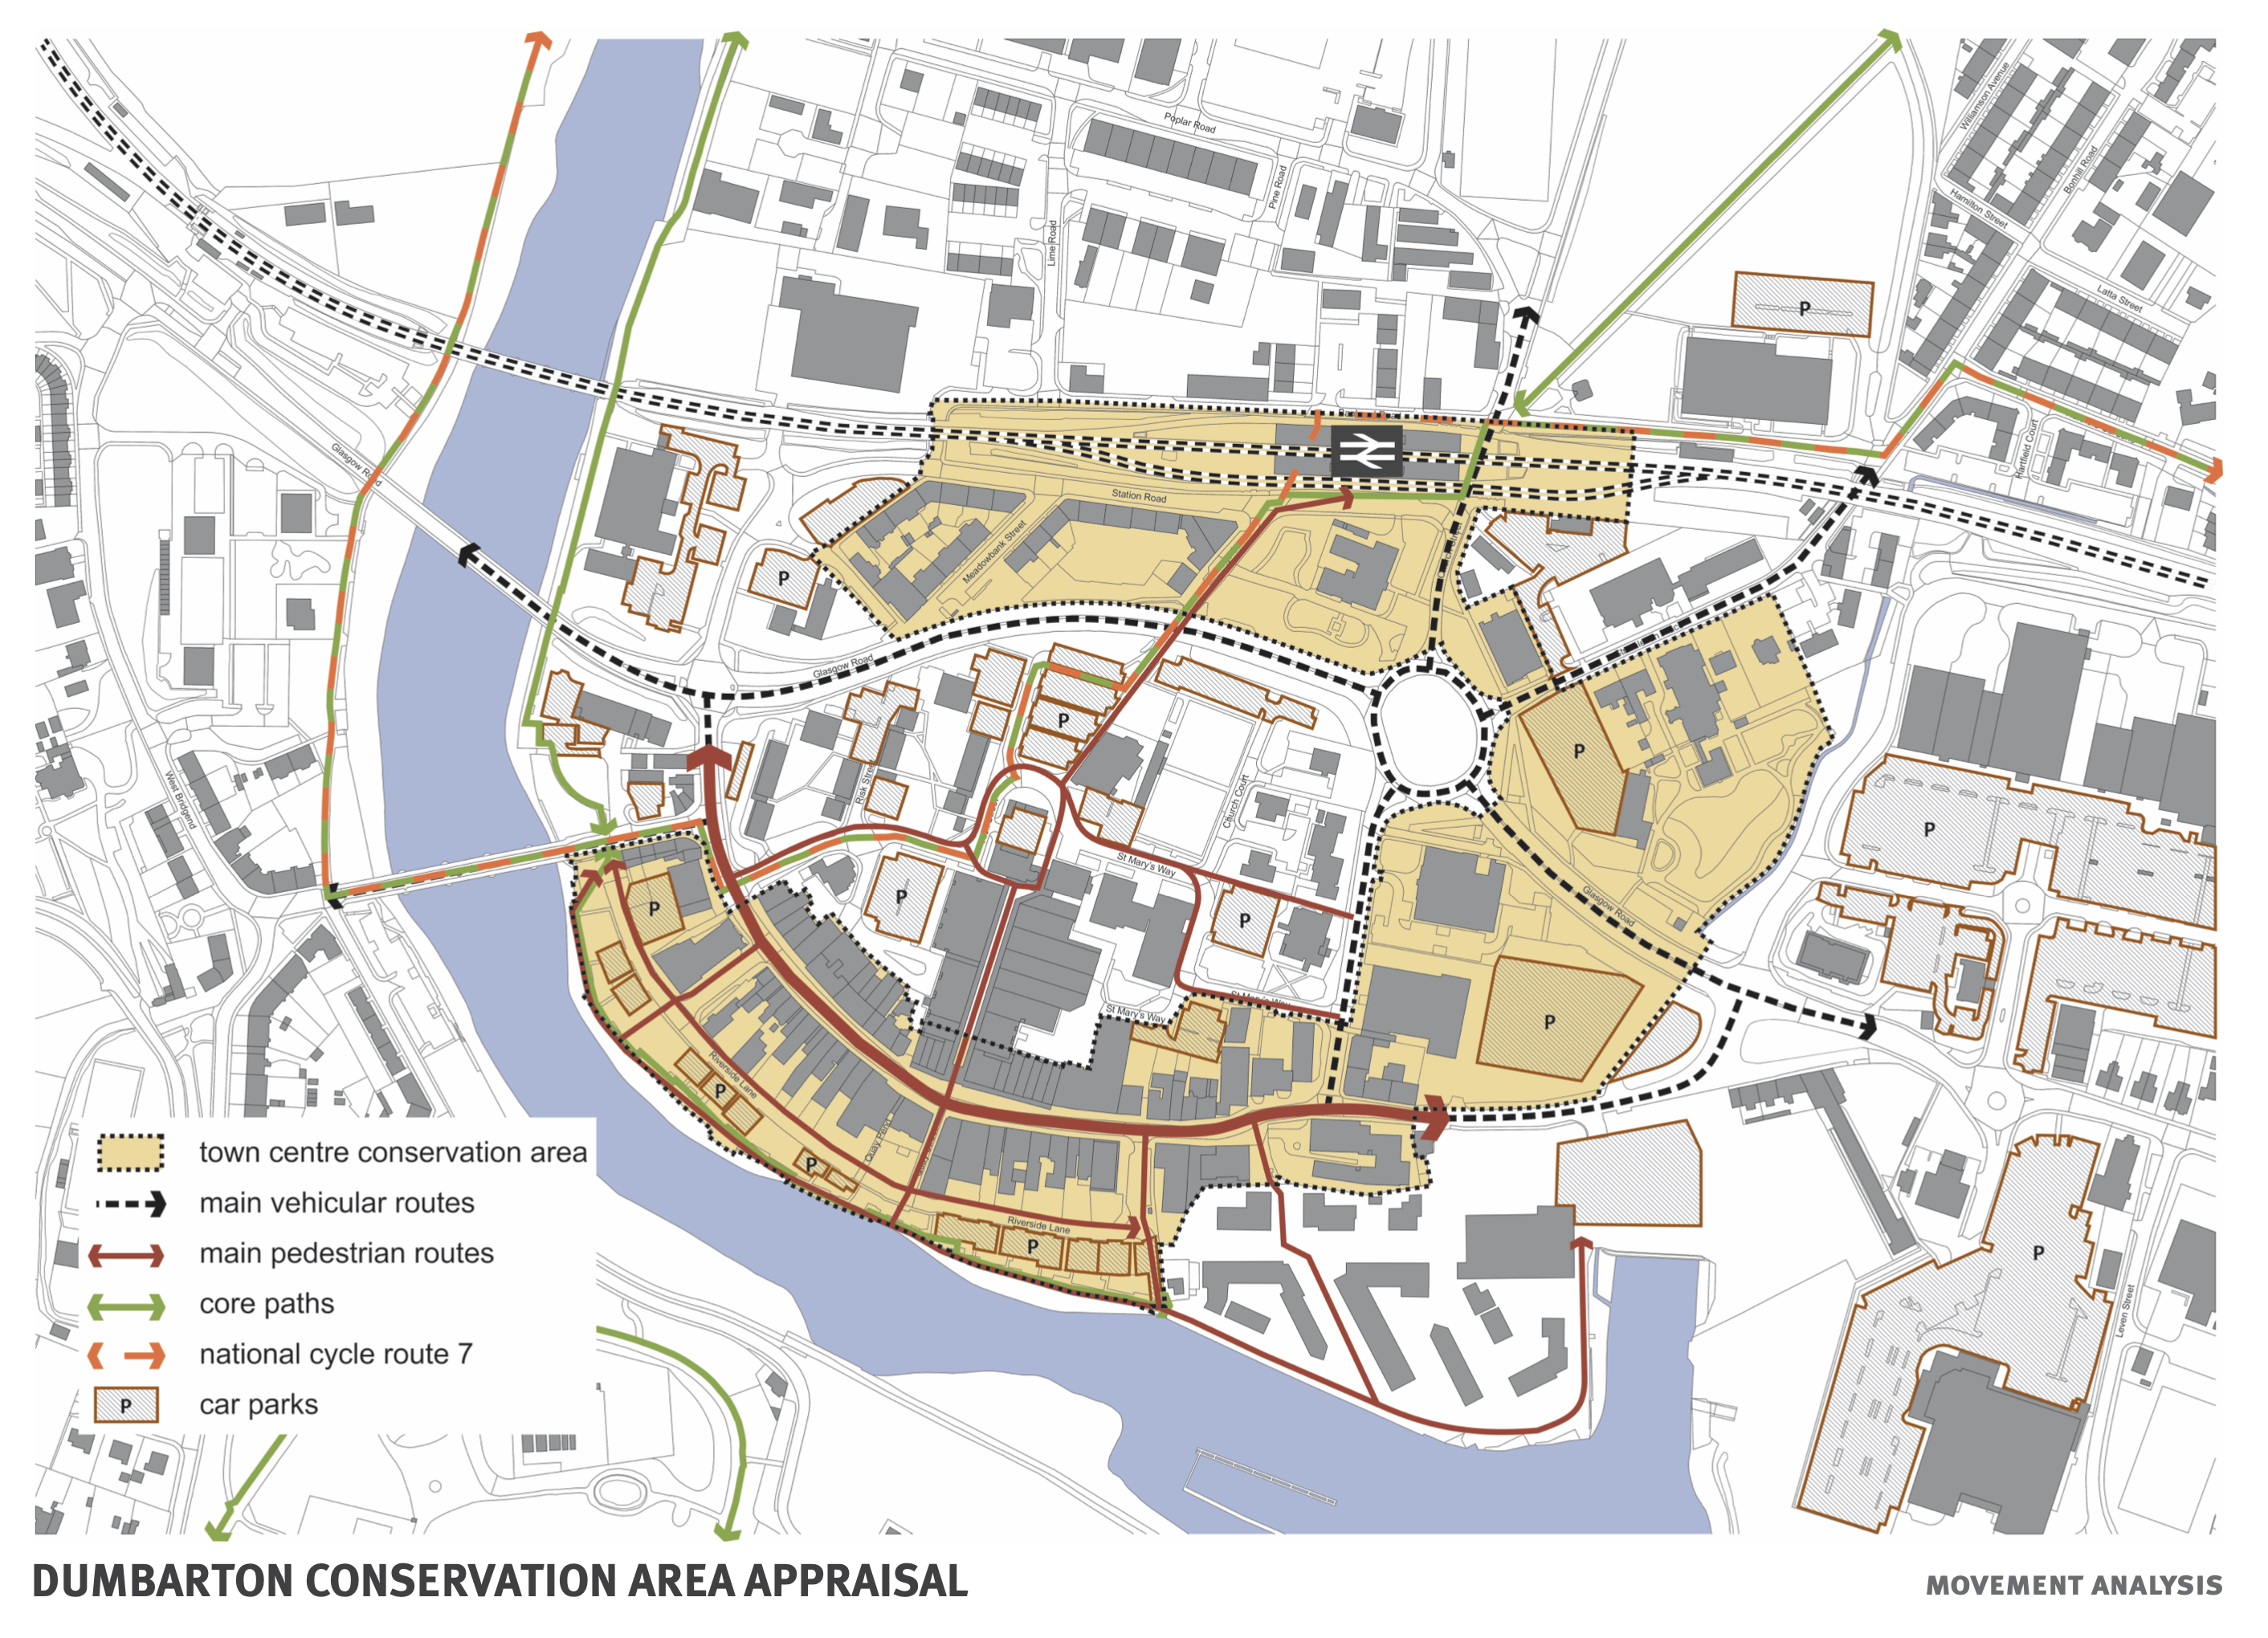 image of plan showing main access and movement routes in Dumbarton Town Centre Conservation Area